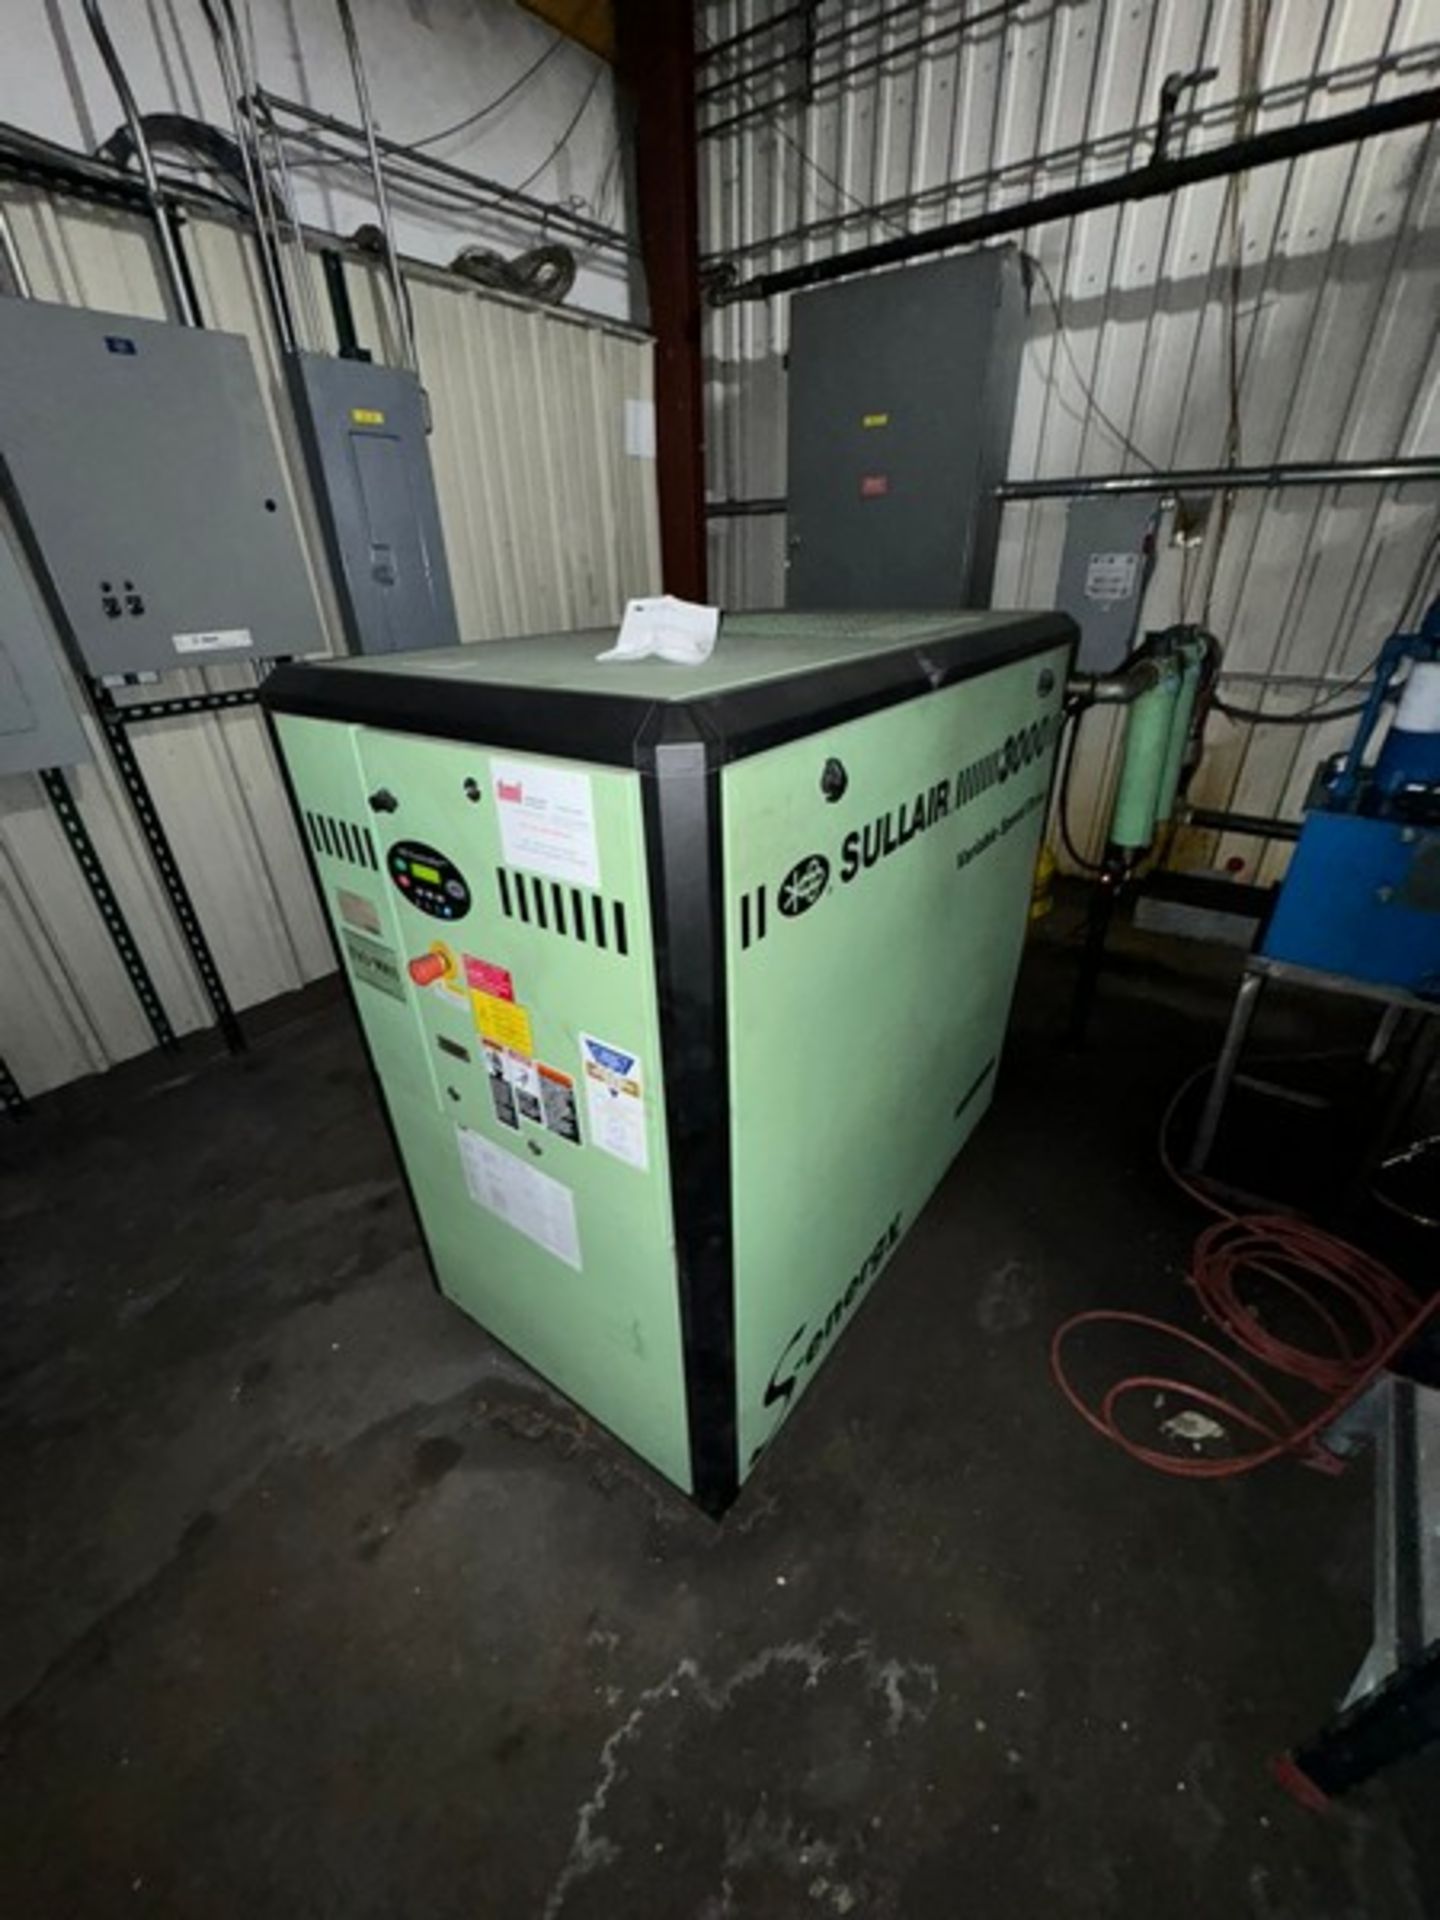 2014 Sullair Air Compressor, M/N 3009VD AC, S/N 201407160089, 125 PSI 167 CFM, with Integral Dryer - Image 5 of 6